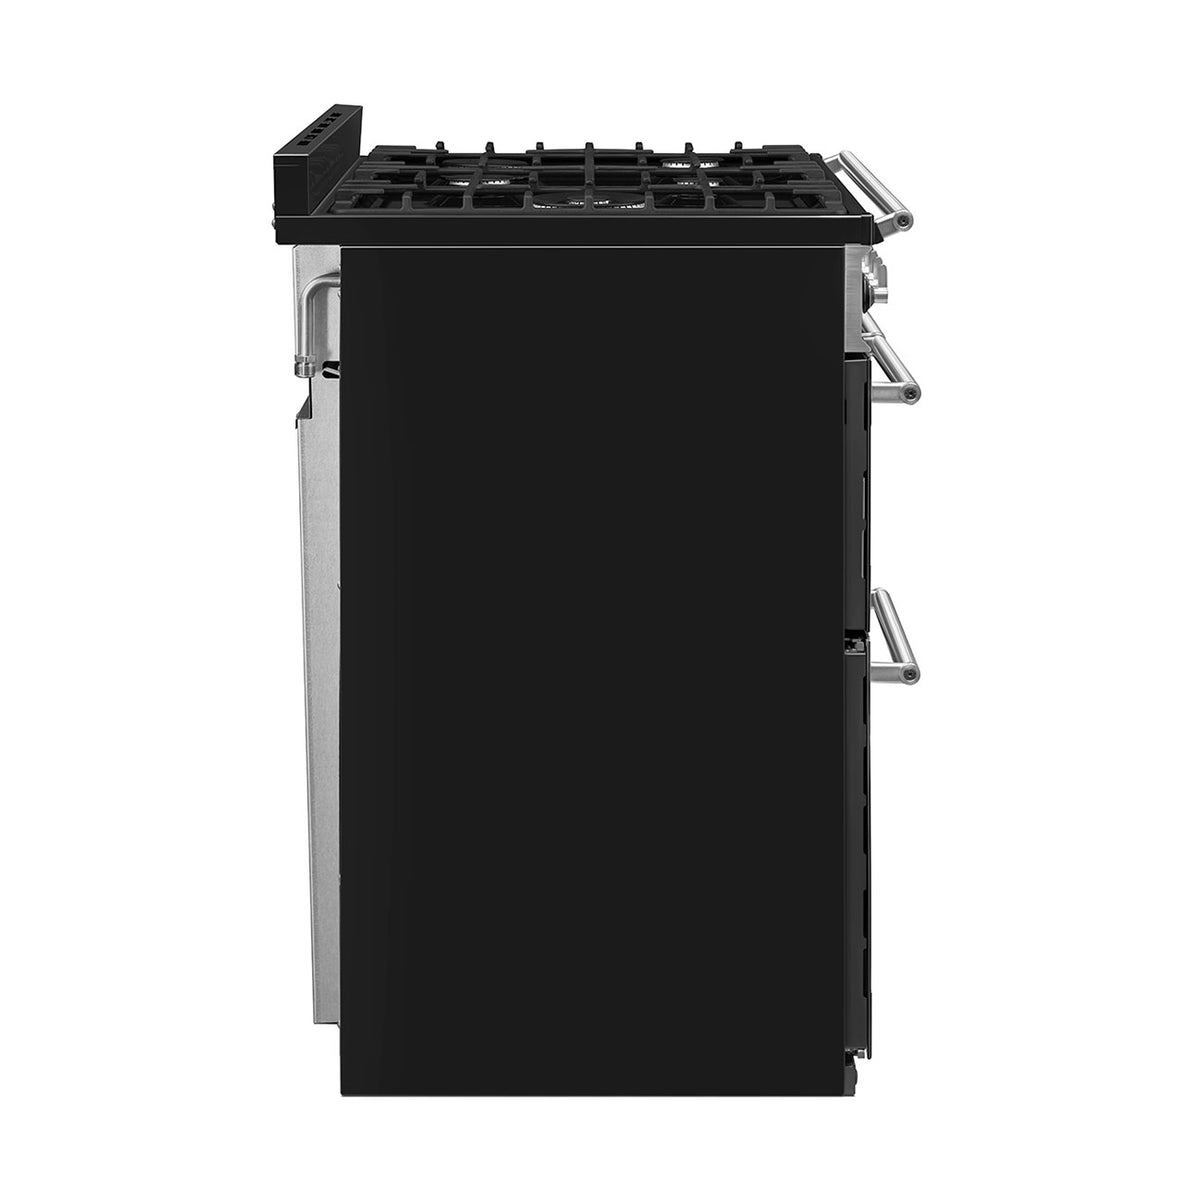 Smeg Symphony 90CM Freestanding Dual Fuel Range Cooker - Stainless Steel | SY93-1 (7552299565244)